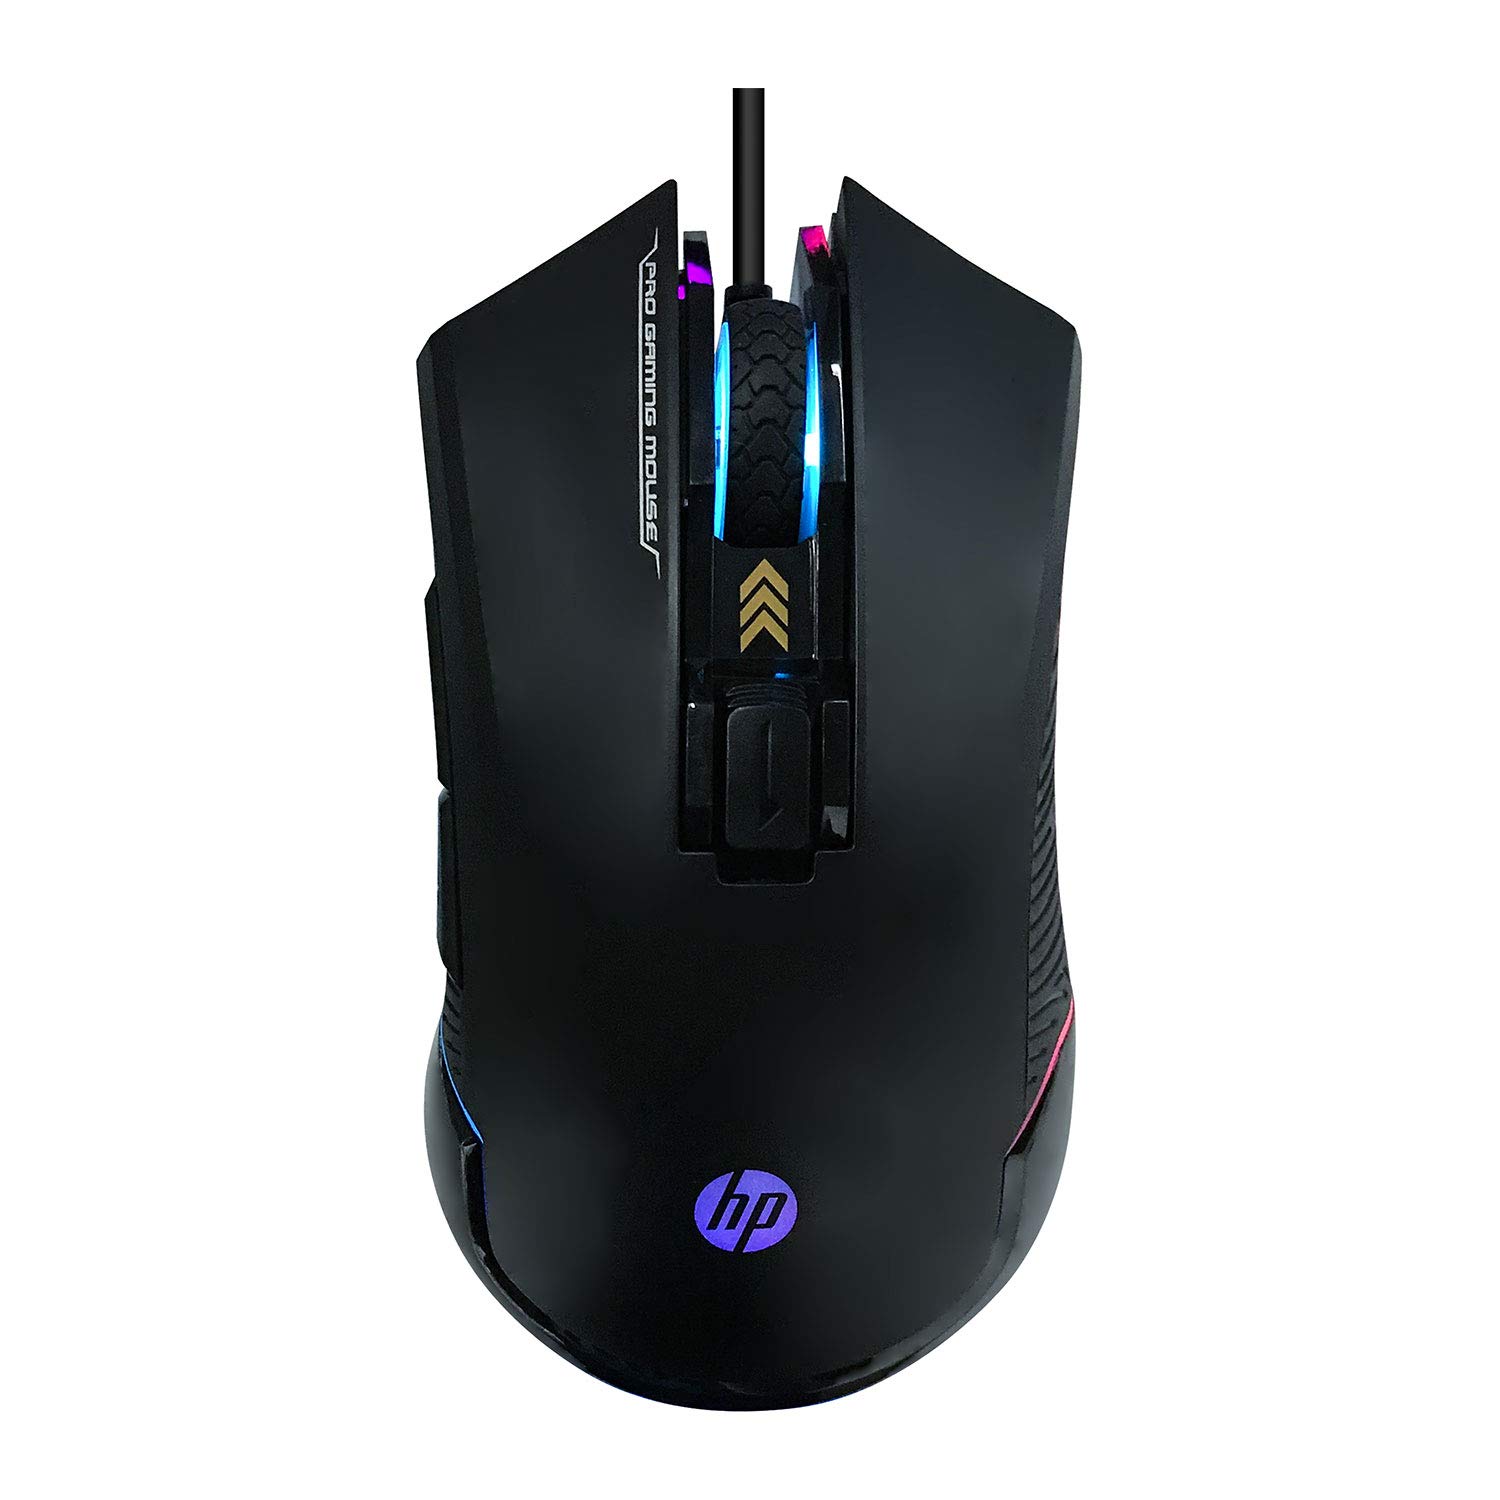 7th gaming mouse